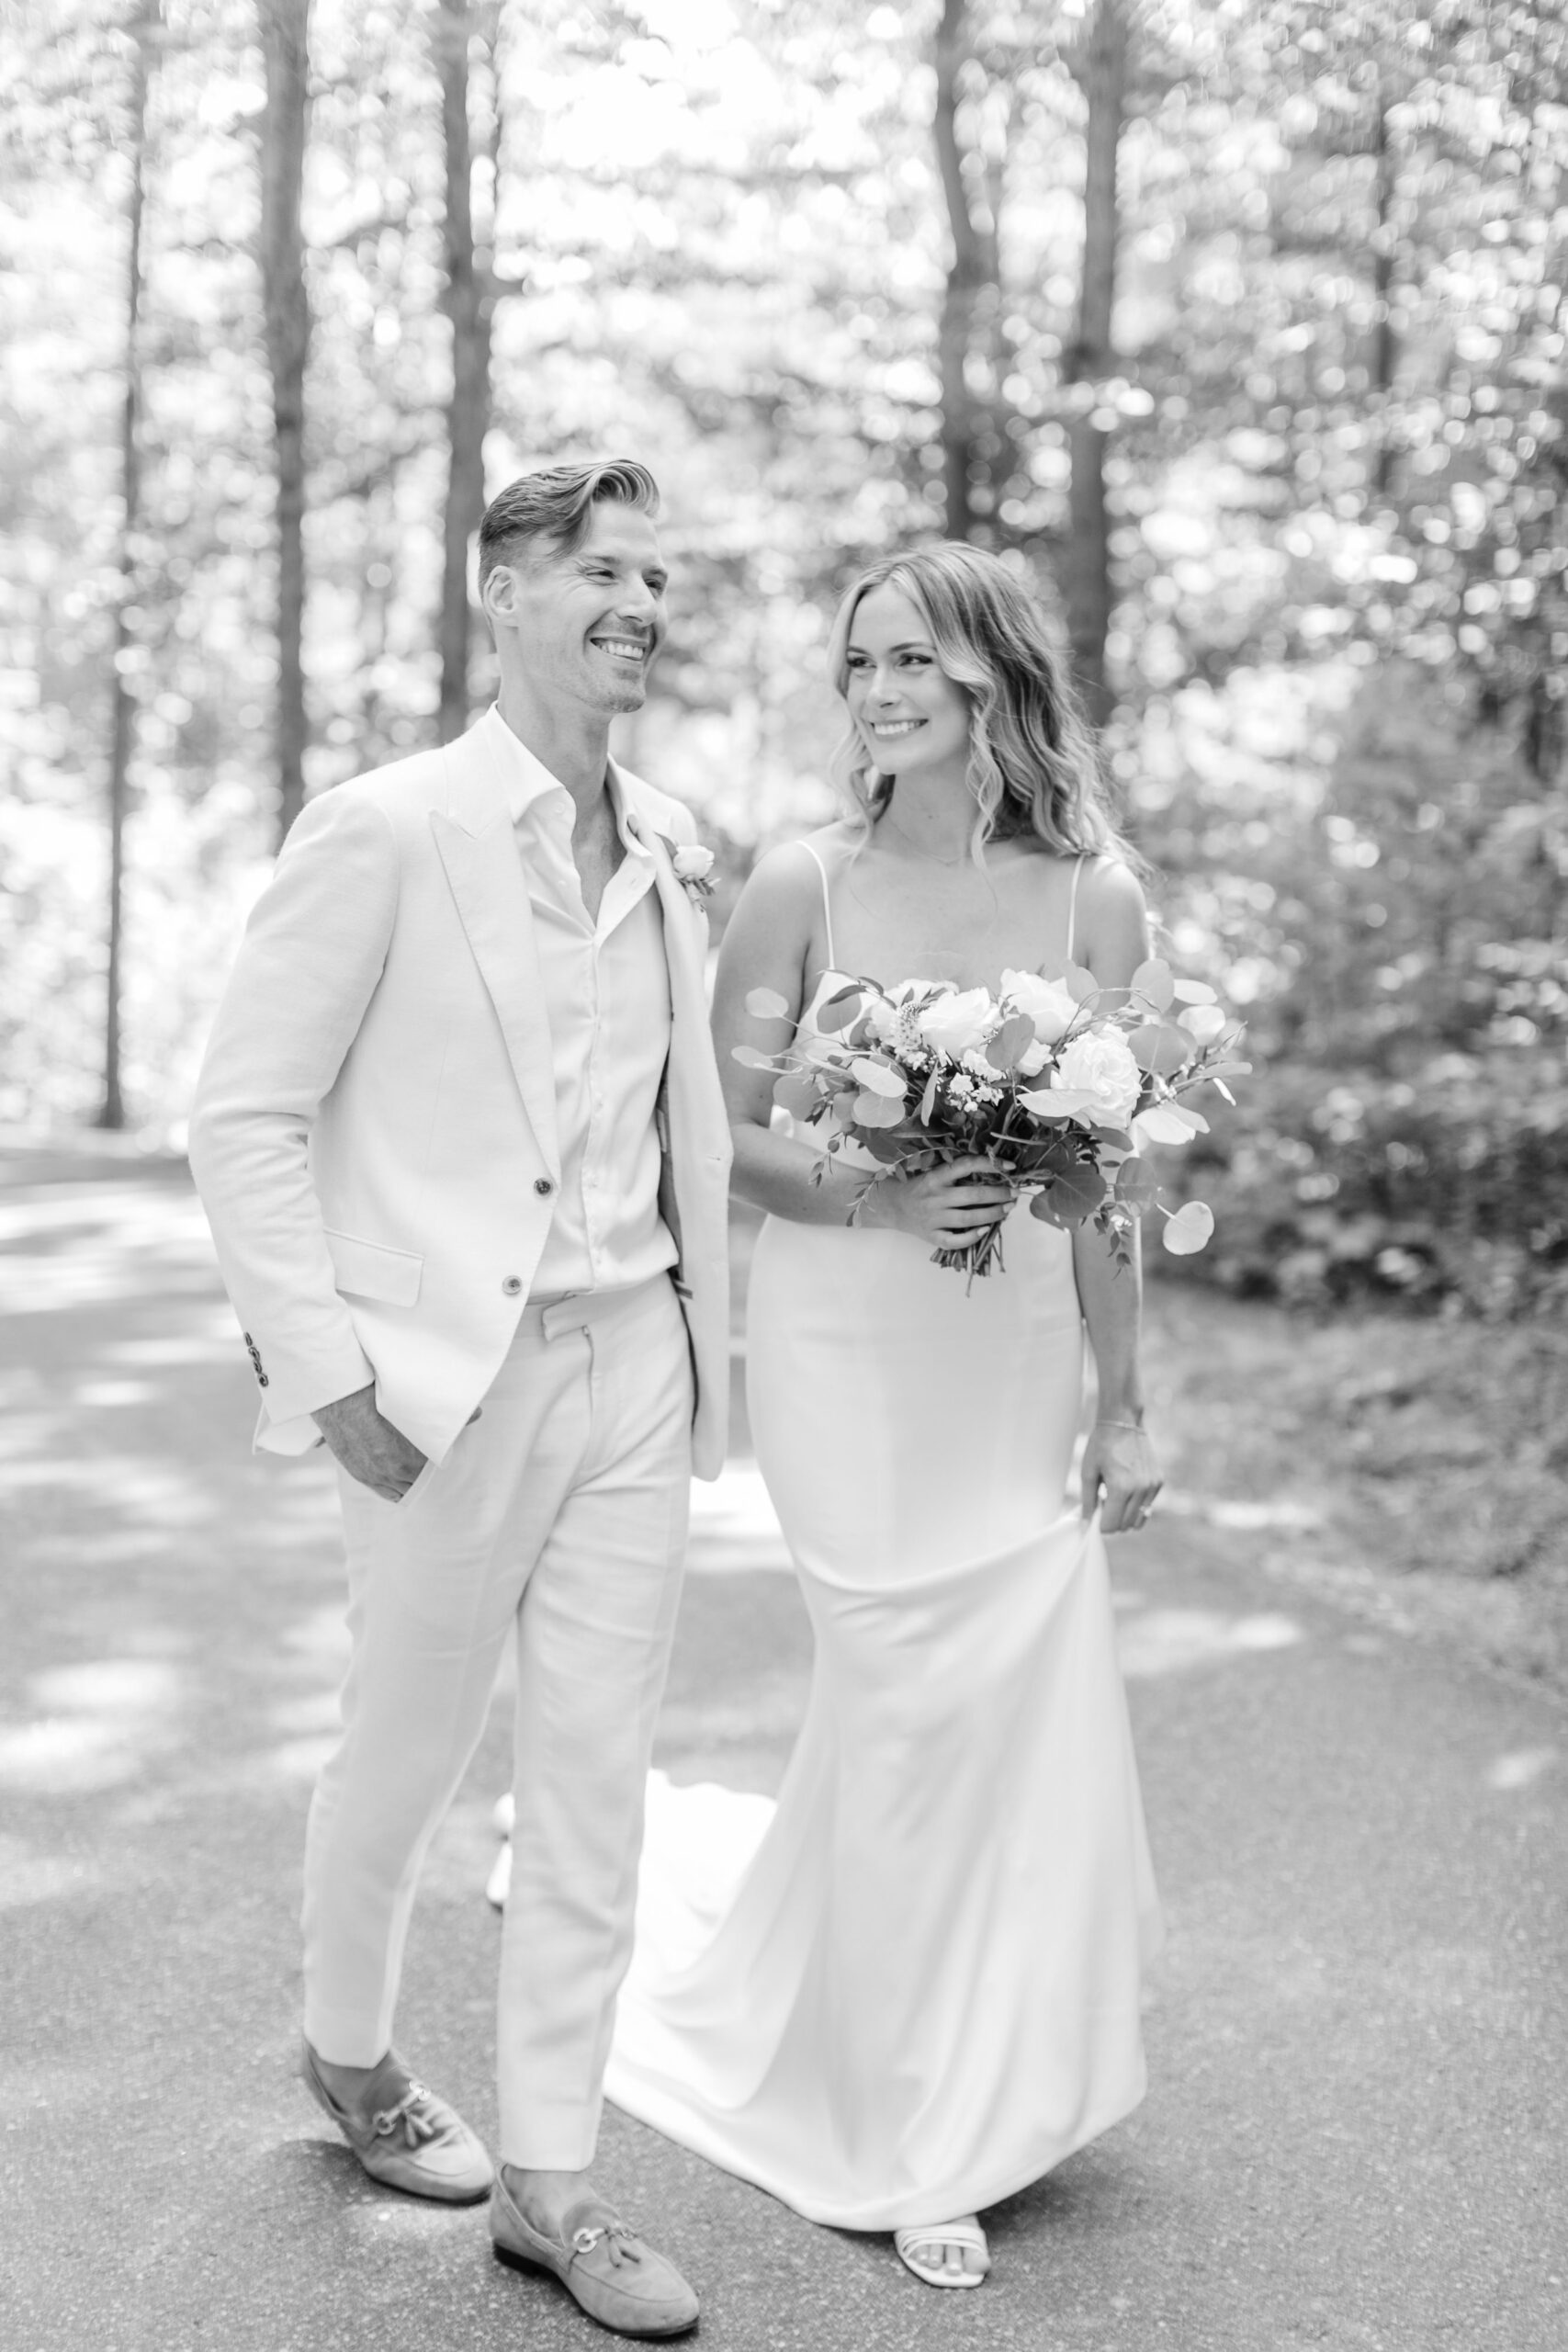 Candid moment of bride and groom smiling at each other at Muskoka wedding.